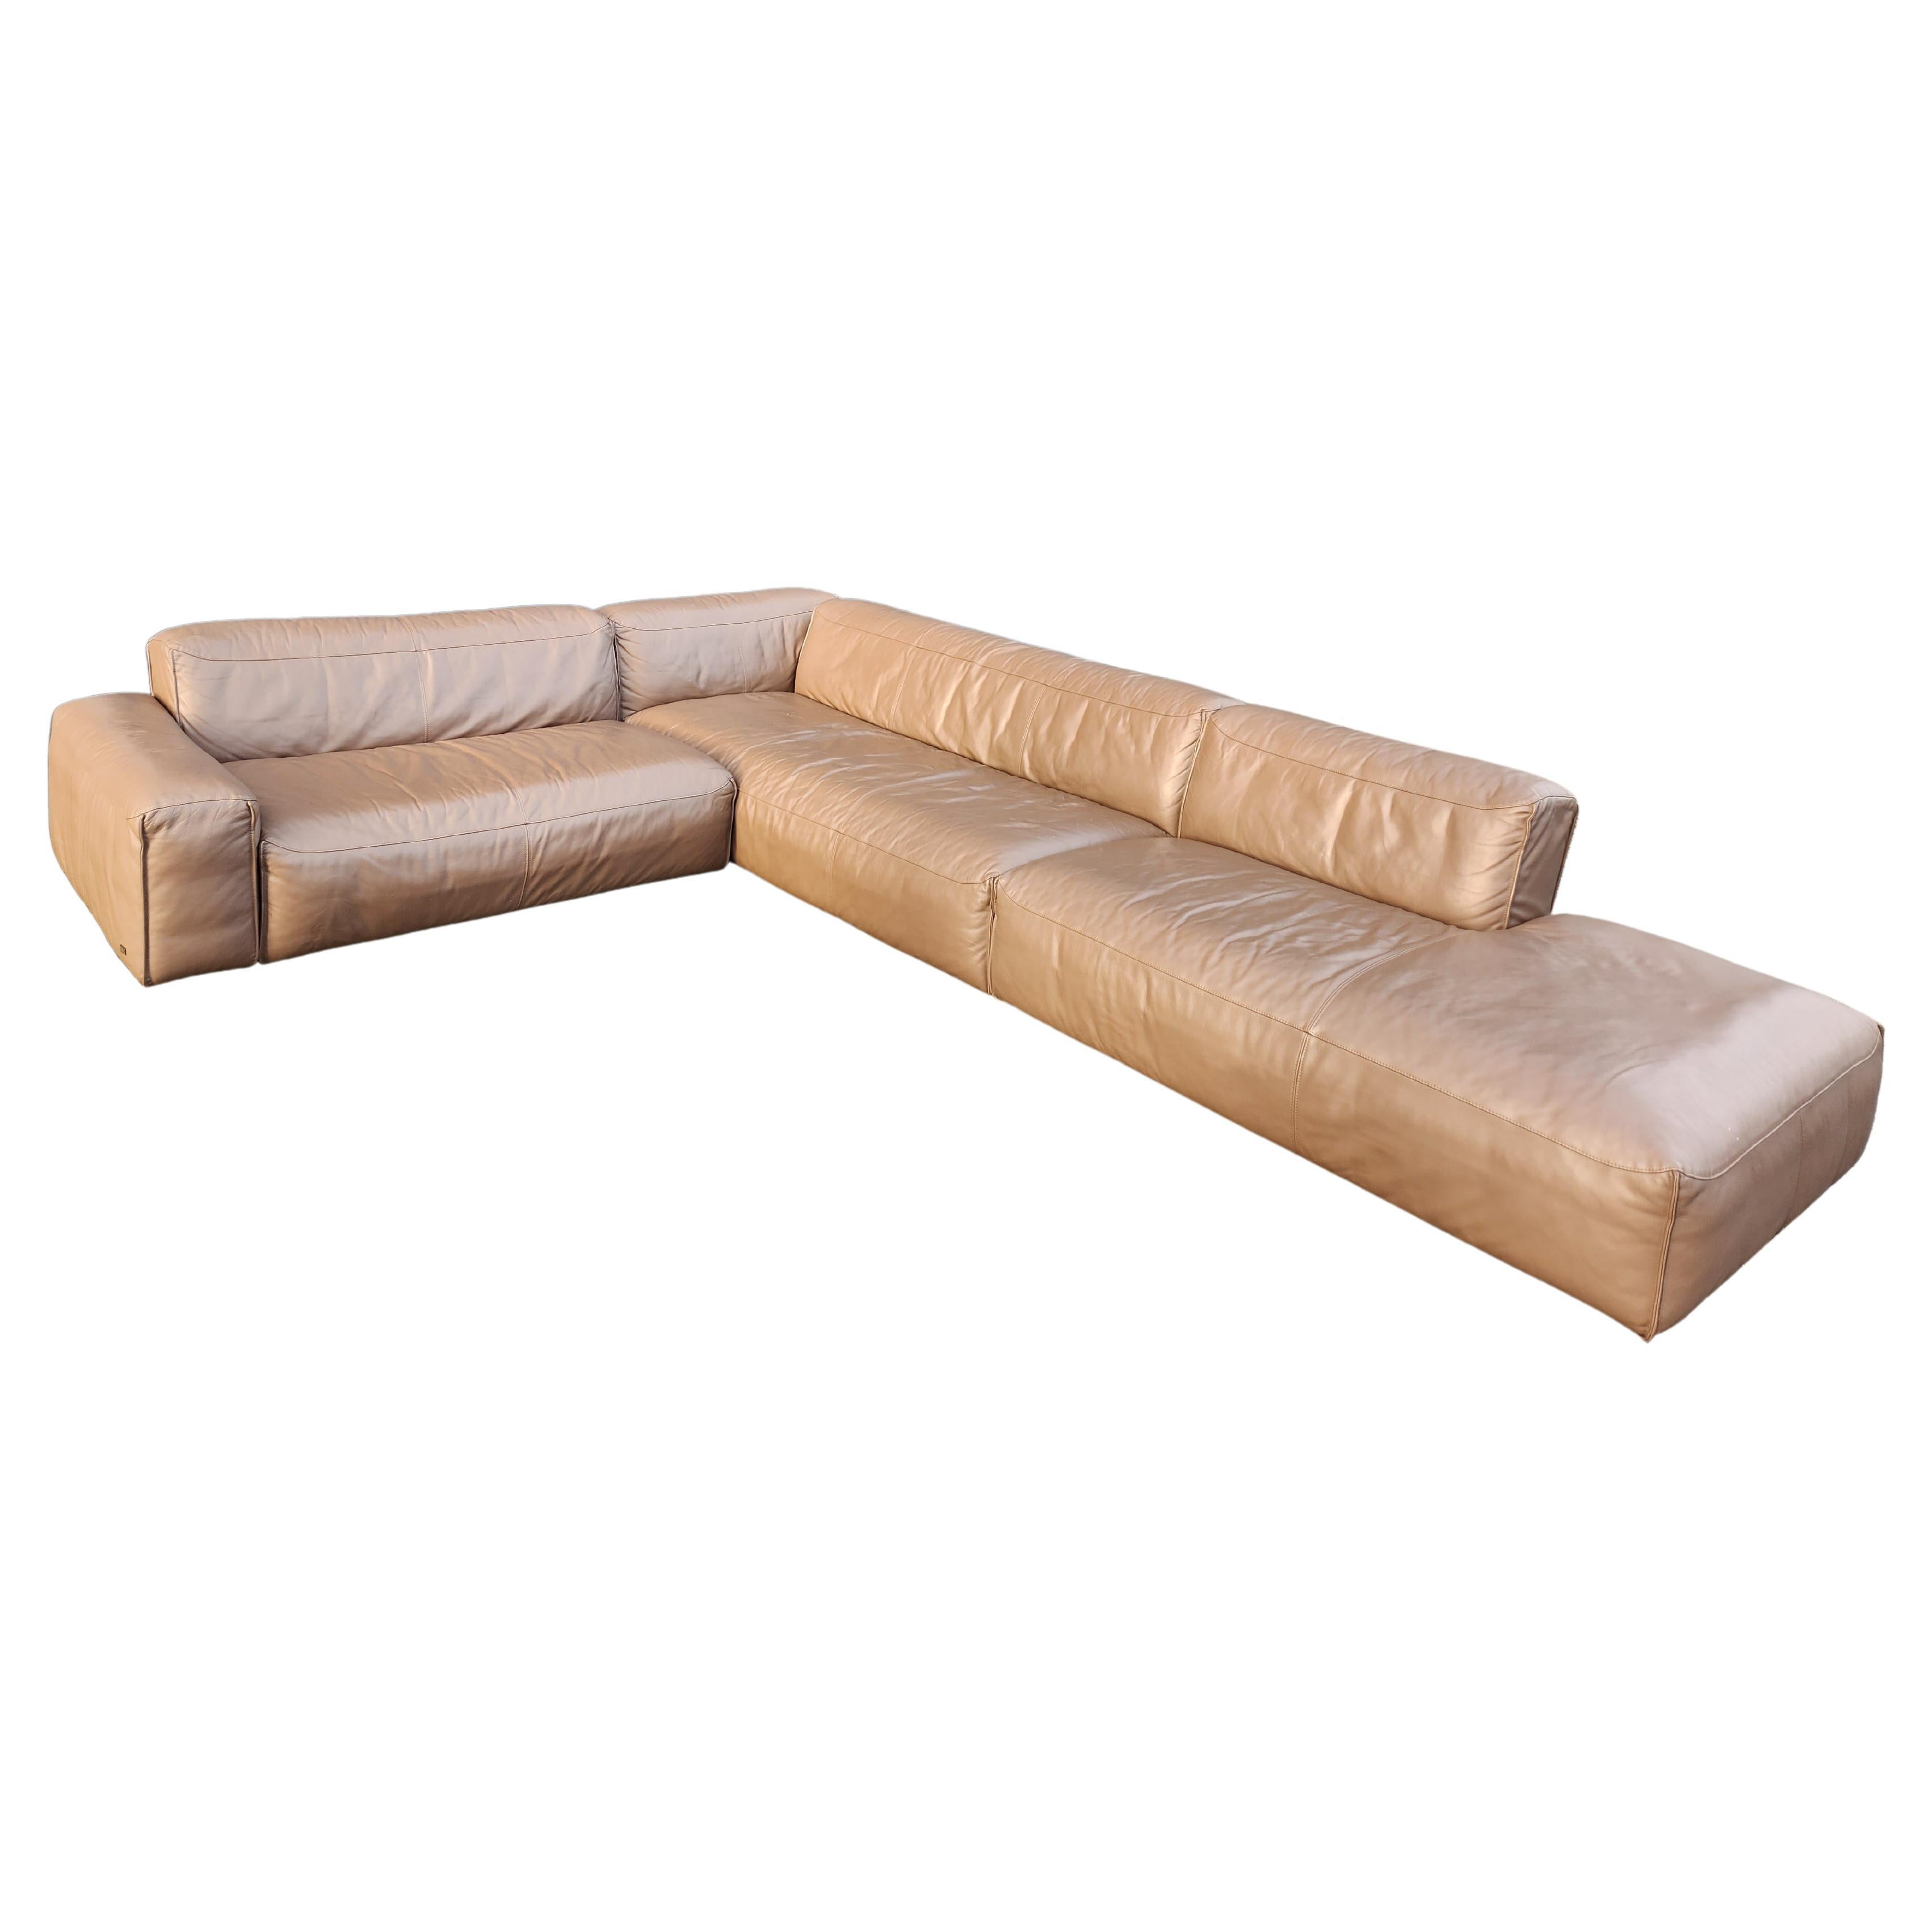 Rolf benz Mio sofa - lounge sofa in leather